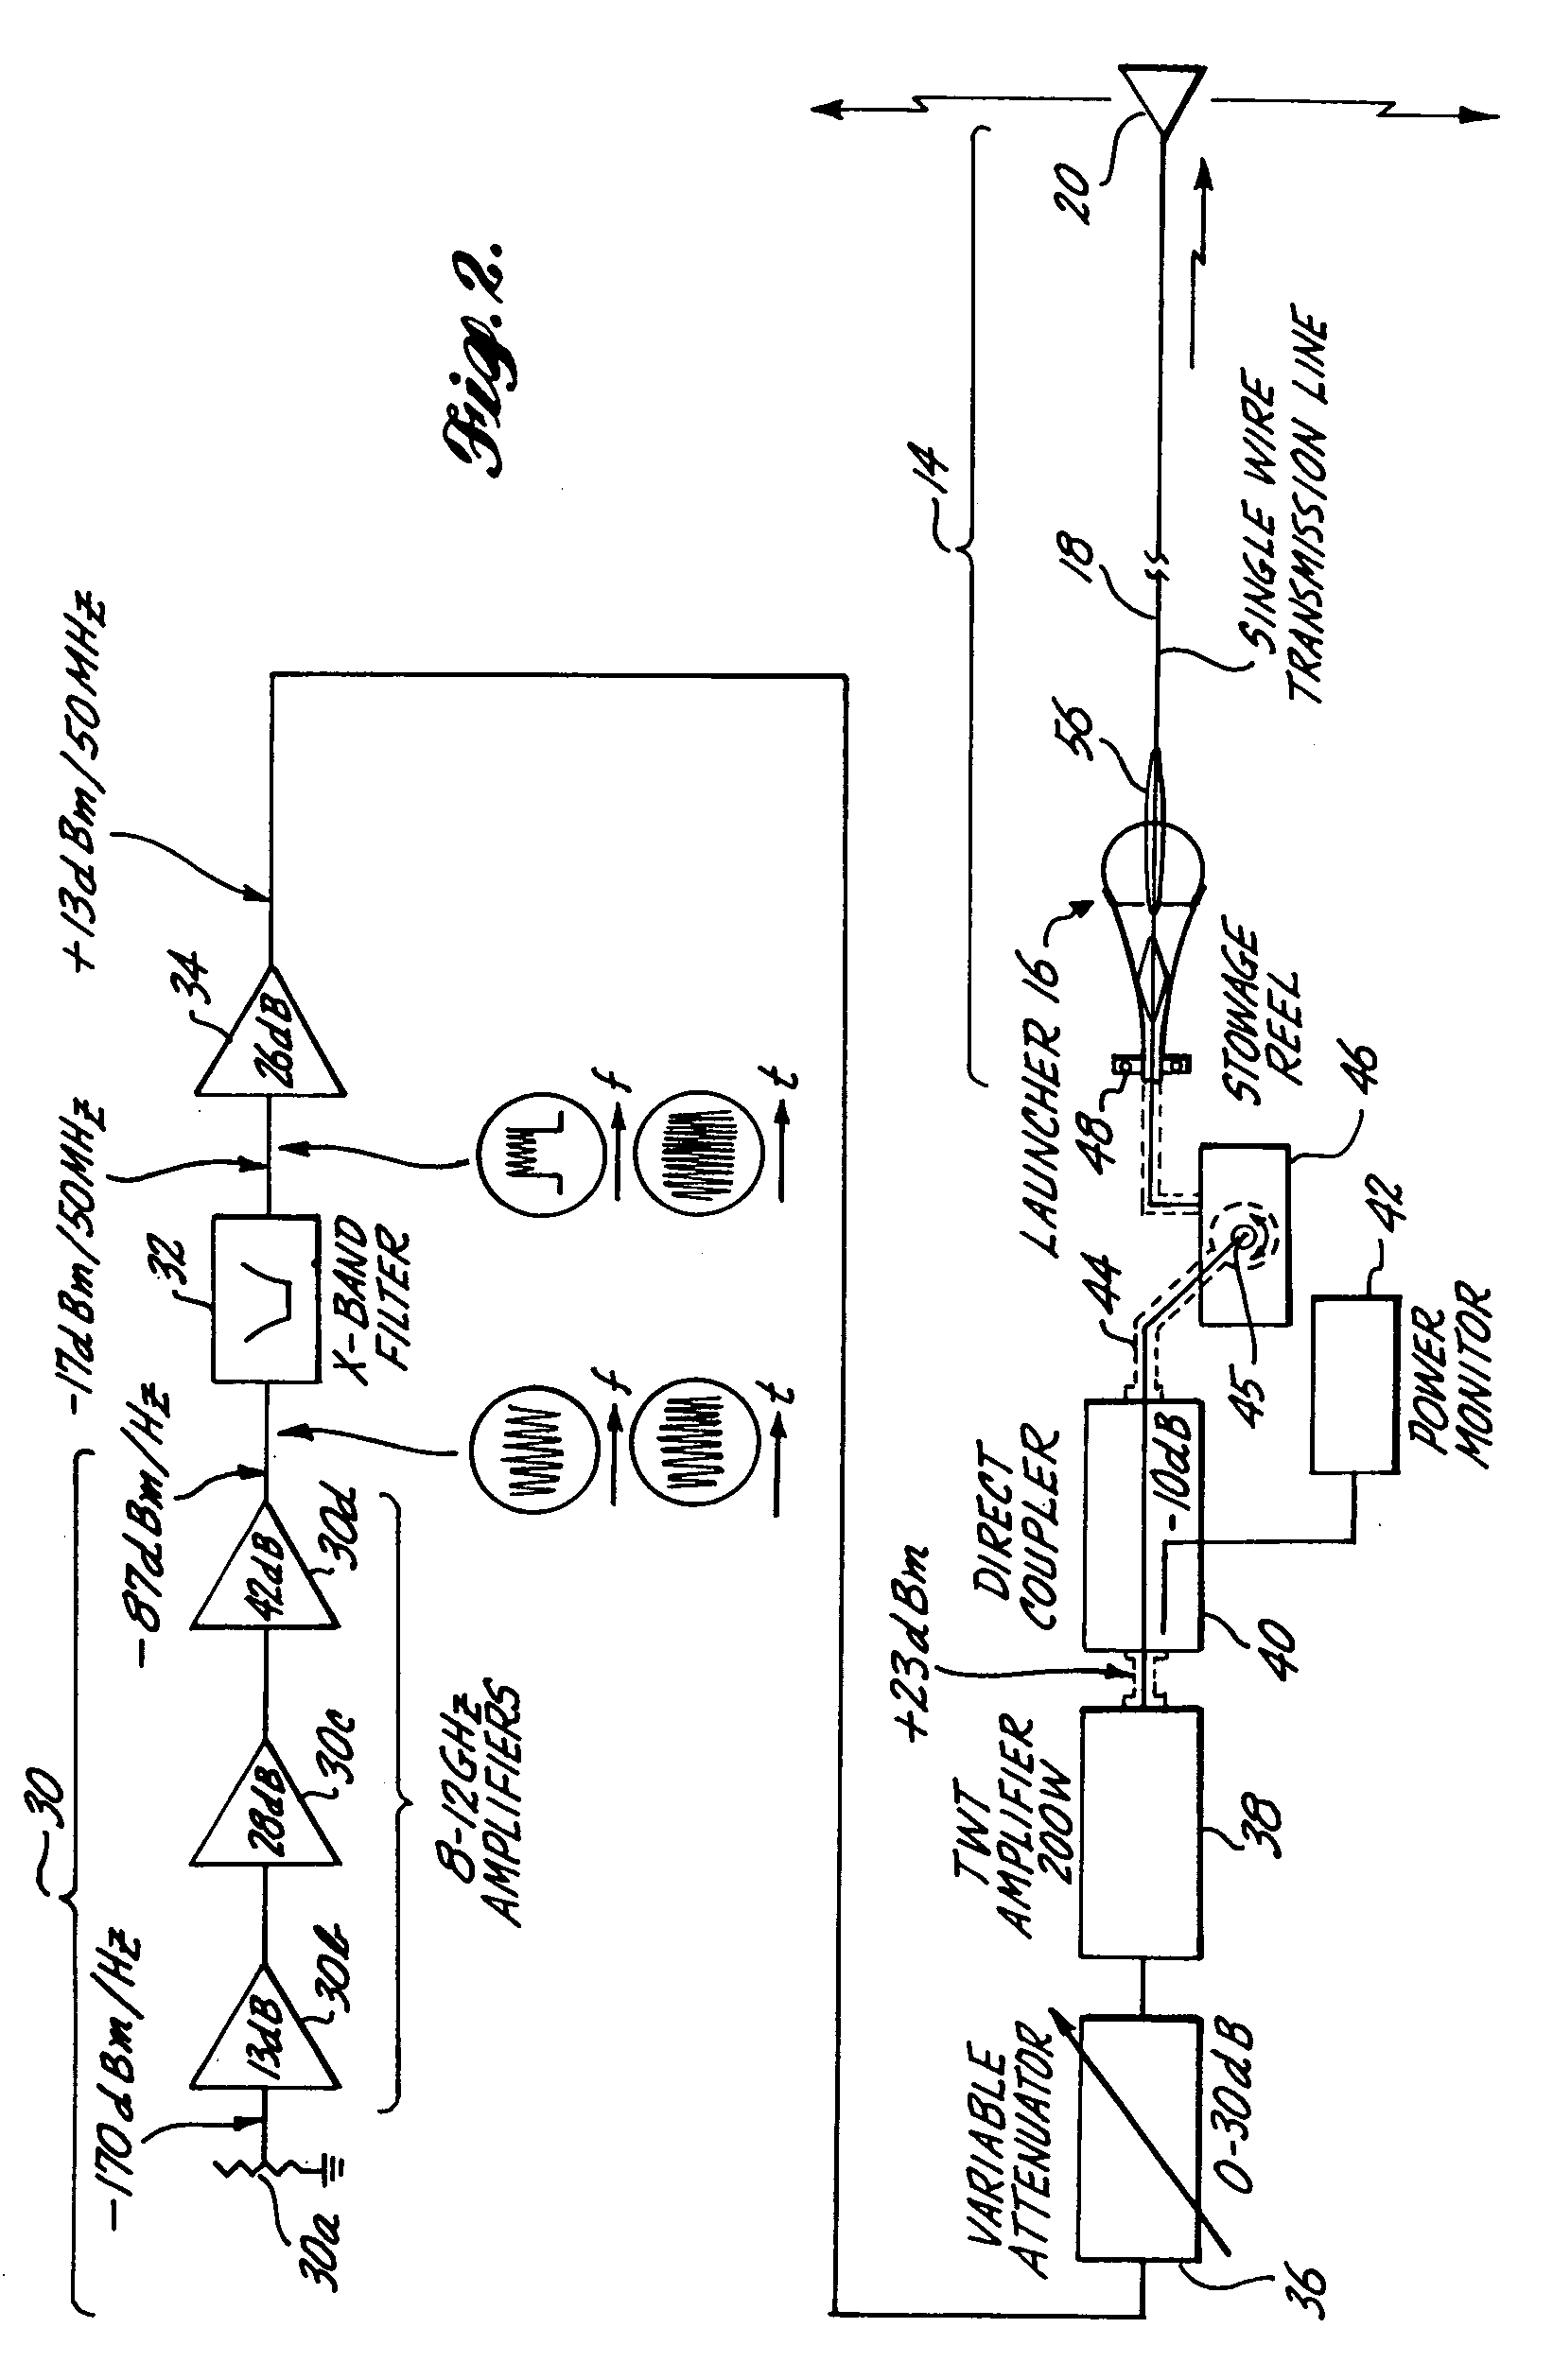 Ventriloqual jamming using a towed transmission line